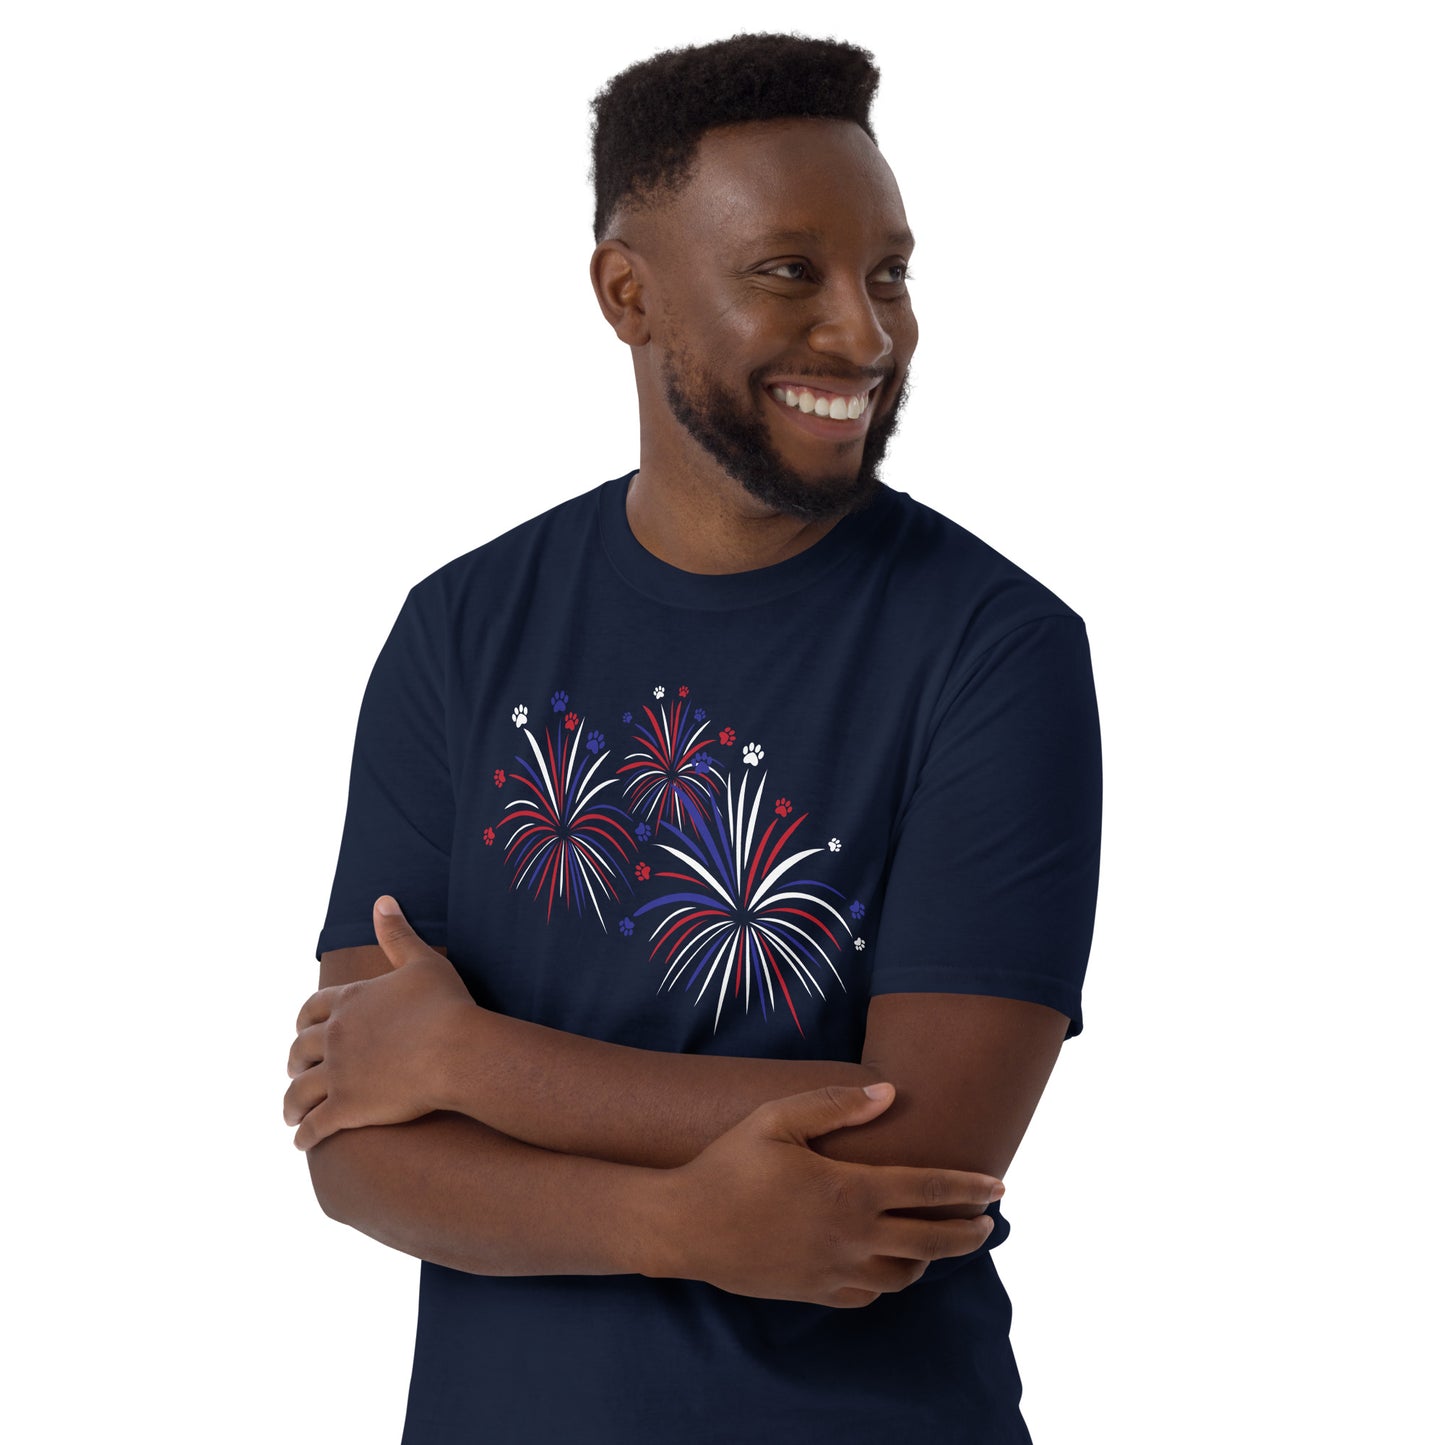 Fireworks of Paws T-Shirt